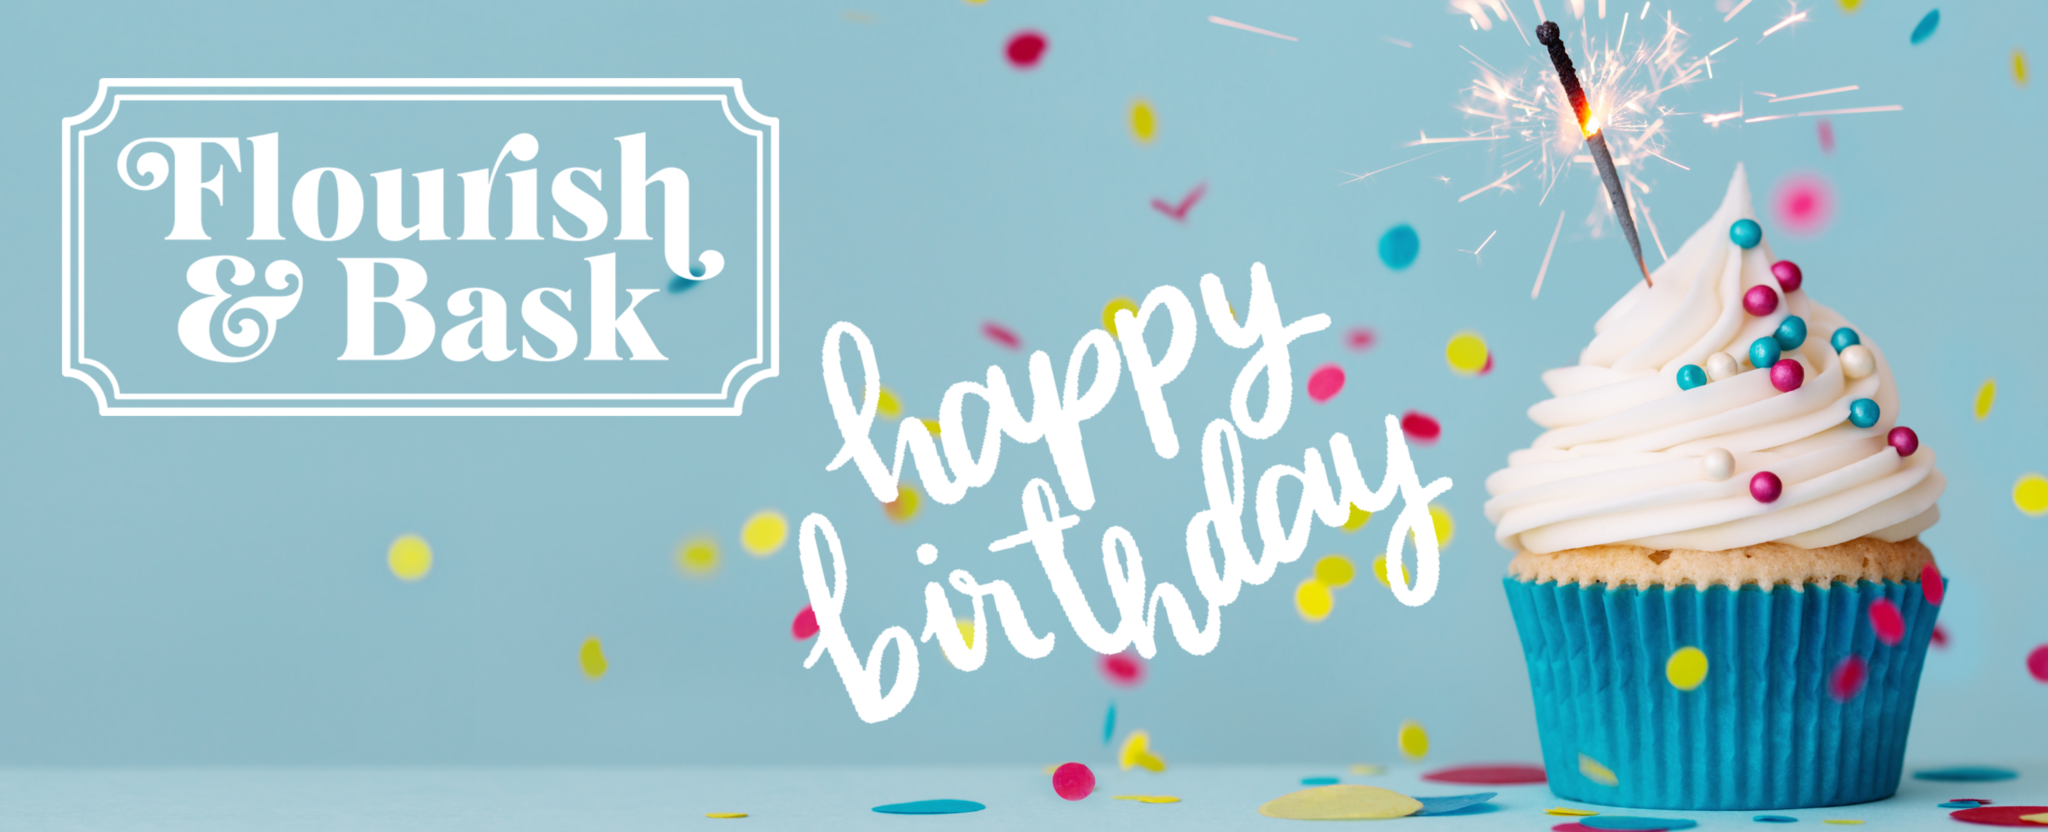 Flourish and Bask is 2 years old!